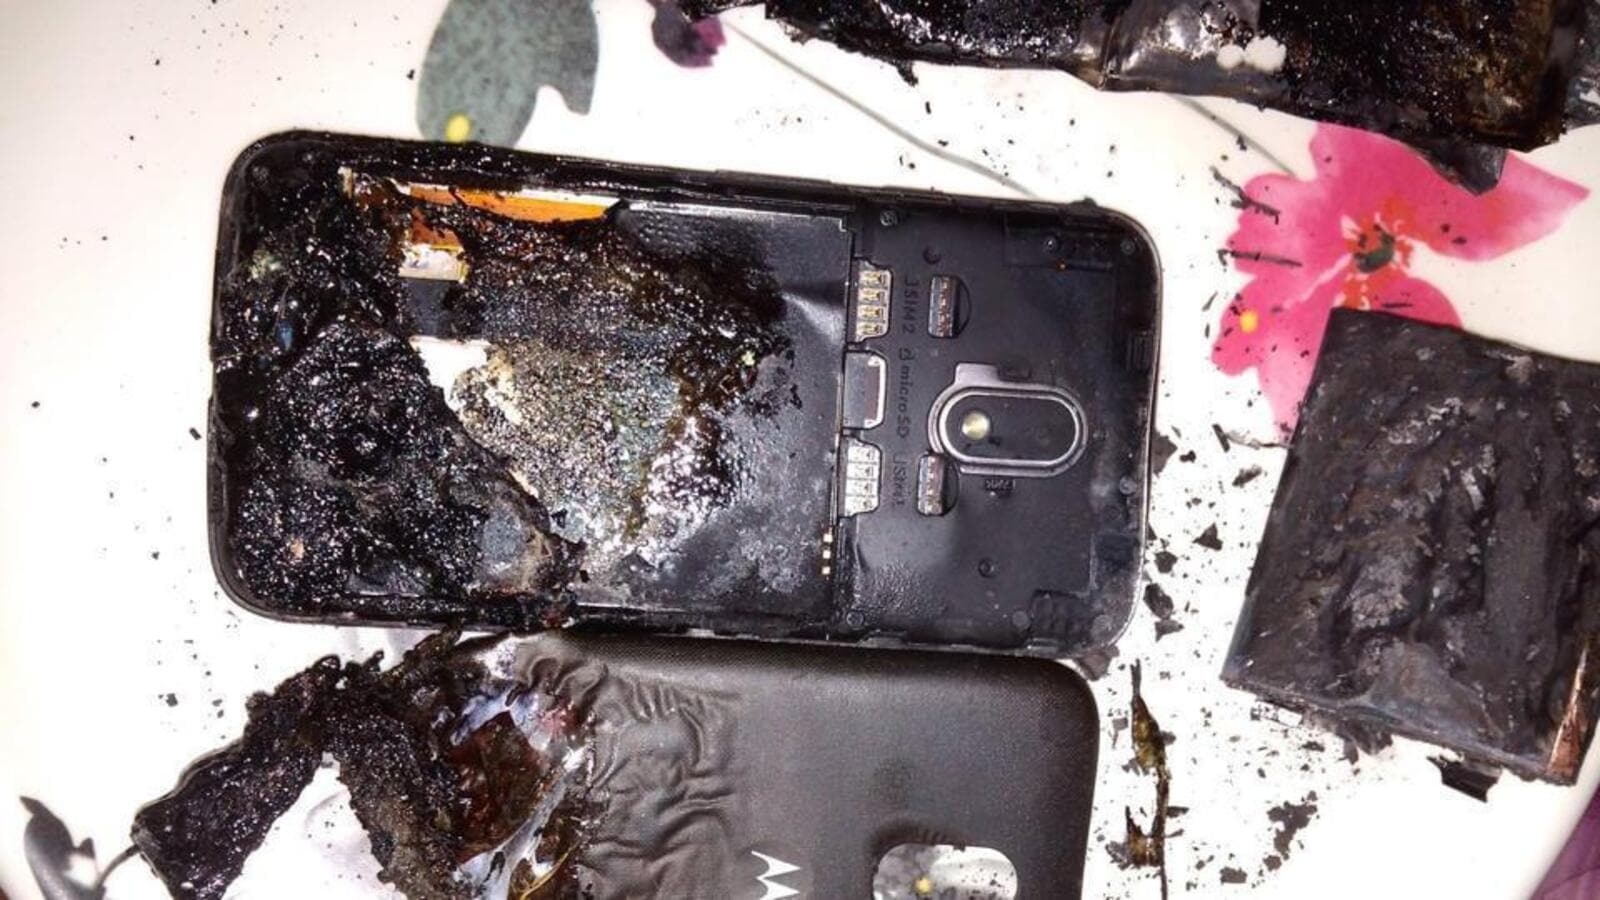 Mobile phone left on charge by parents blows up, kills 8-month-old daughter  - Hindustan Times